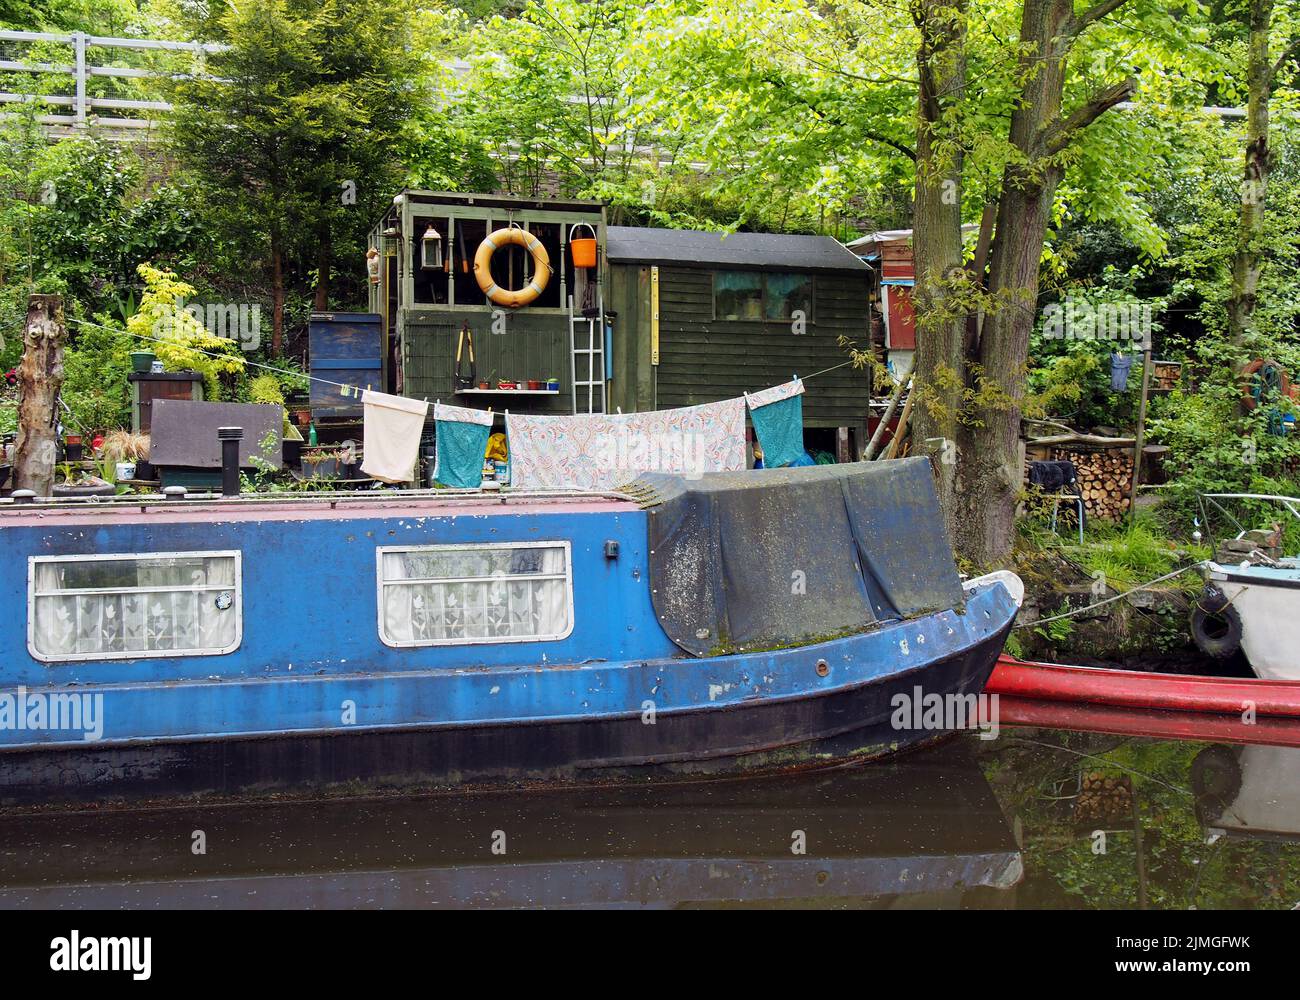 An old scruffy blue narrow boat moored next to wooden sheds with washing on the line on the rochdale canal near hebden bridge Stock Photo